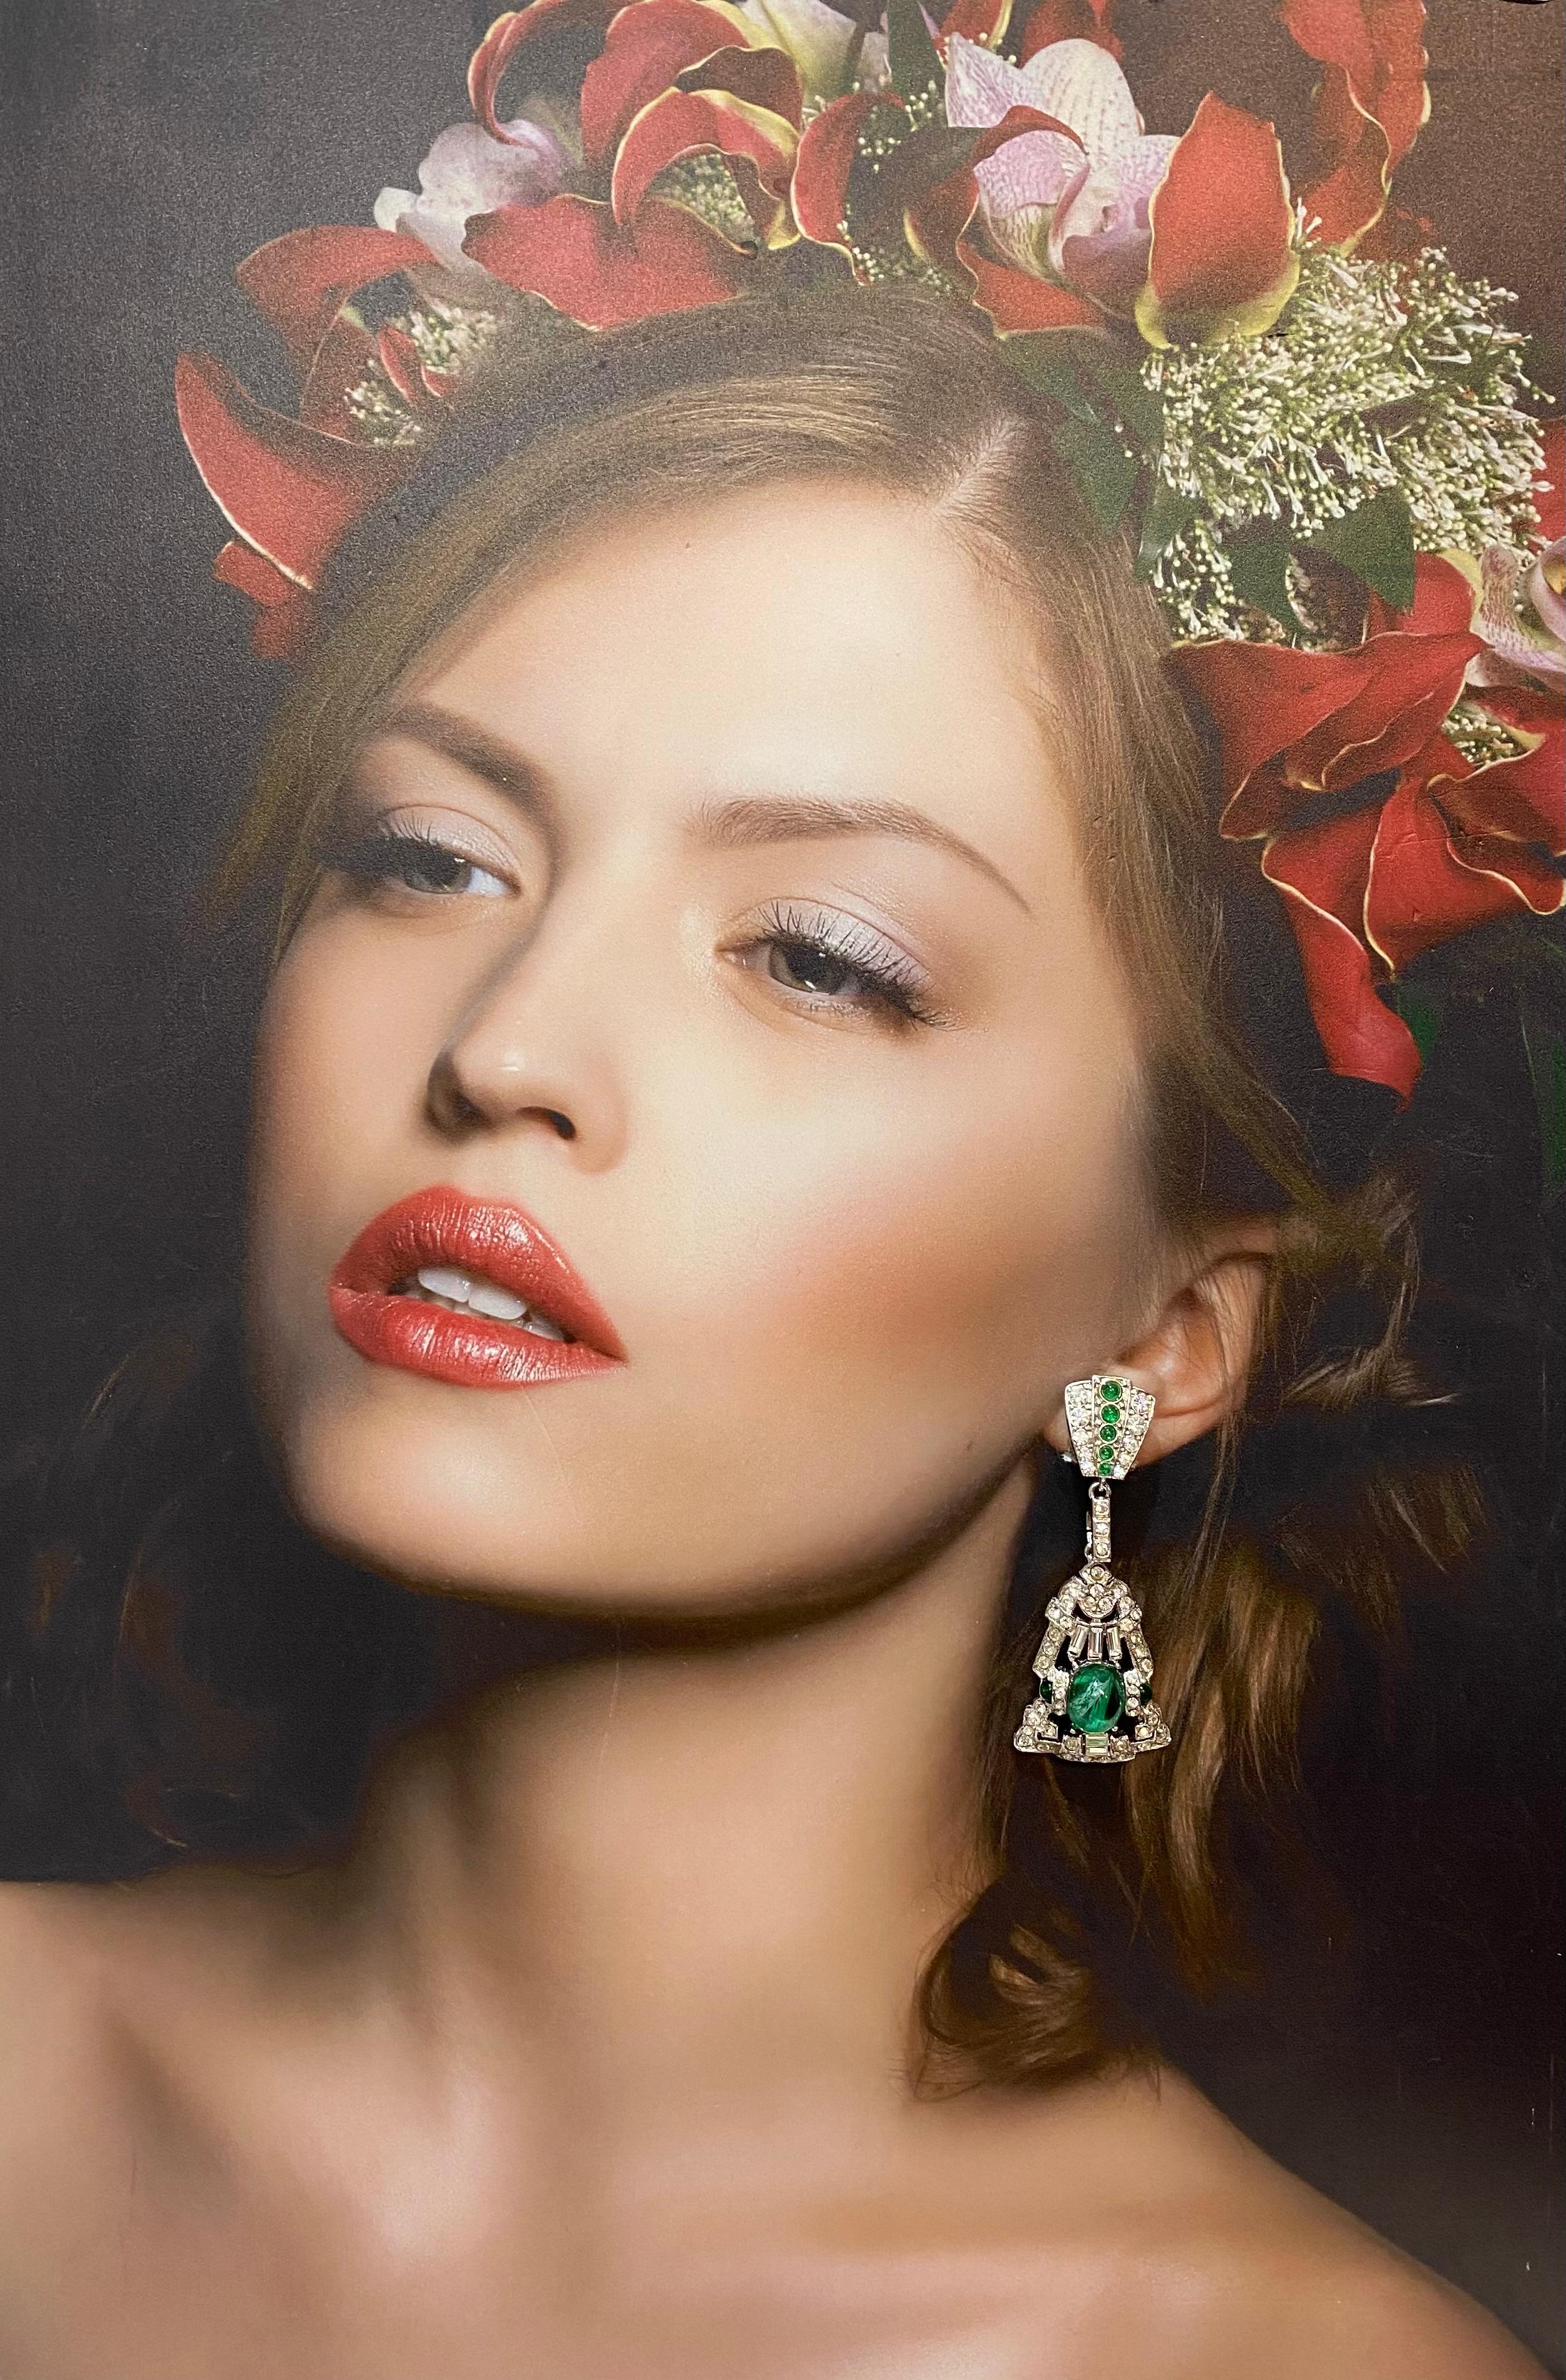 Stunning Carlo Zini bijoux earrings
Non allergenic rhodium
Wonderful construction of class A Swarovski crystals 
Emerald like elements 
Total length cm 7 (2.75 inches)
Clip on closure, pierced on request
100% Artisanal work
Worldwide express